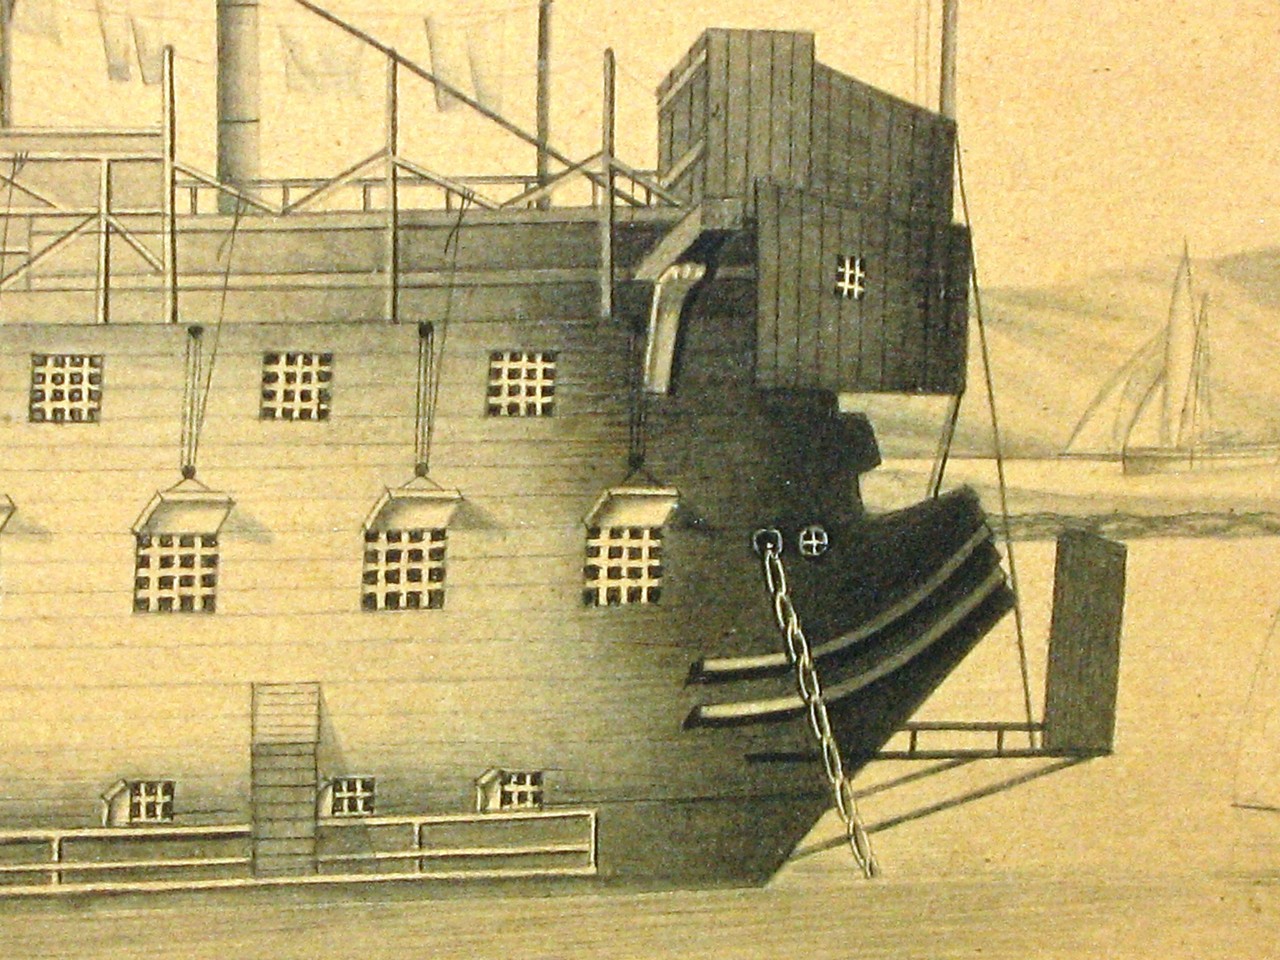 FRENCH PRISONER SCHOOL, CIRCA 1812, A Prison Hulk anchored in the Medway with a Man of War beyond, - Image 6 of 6